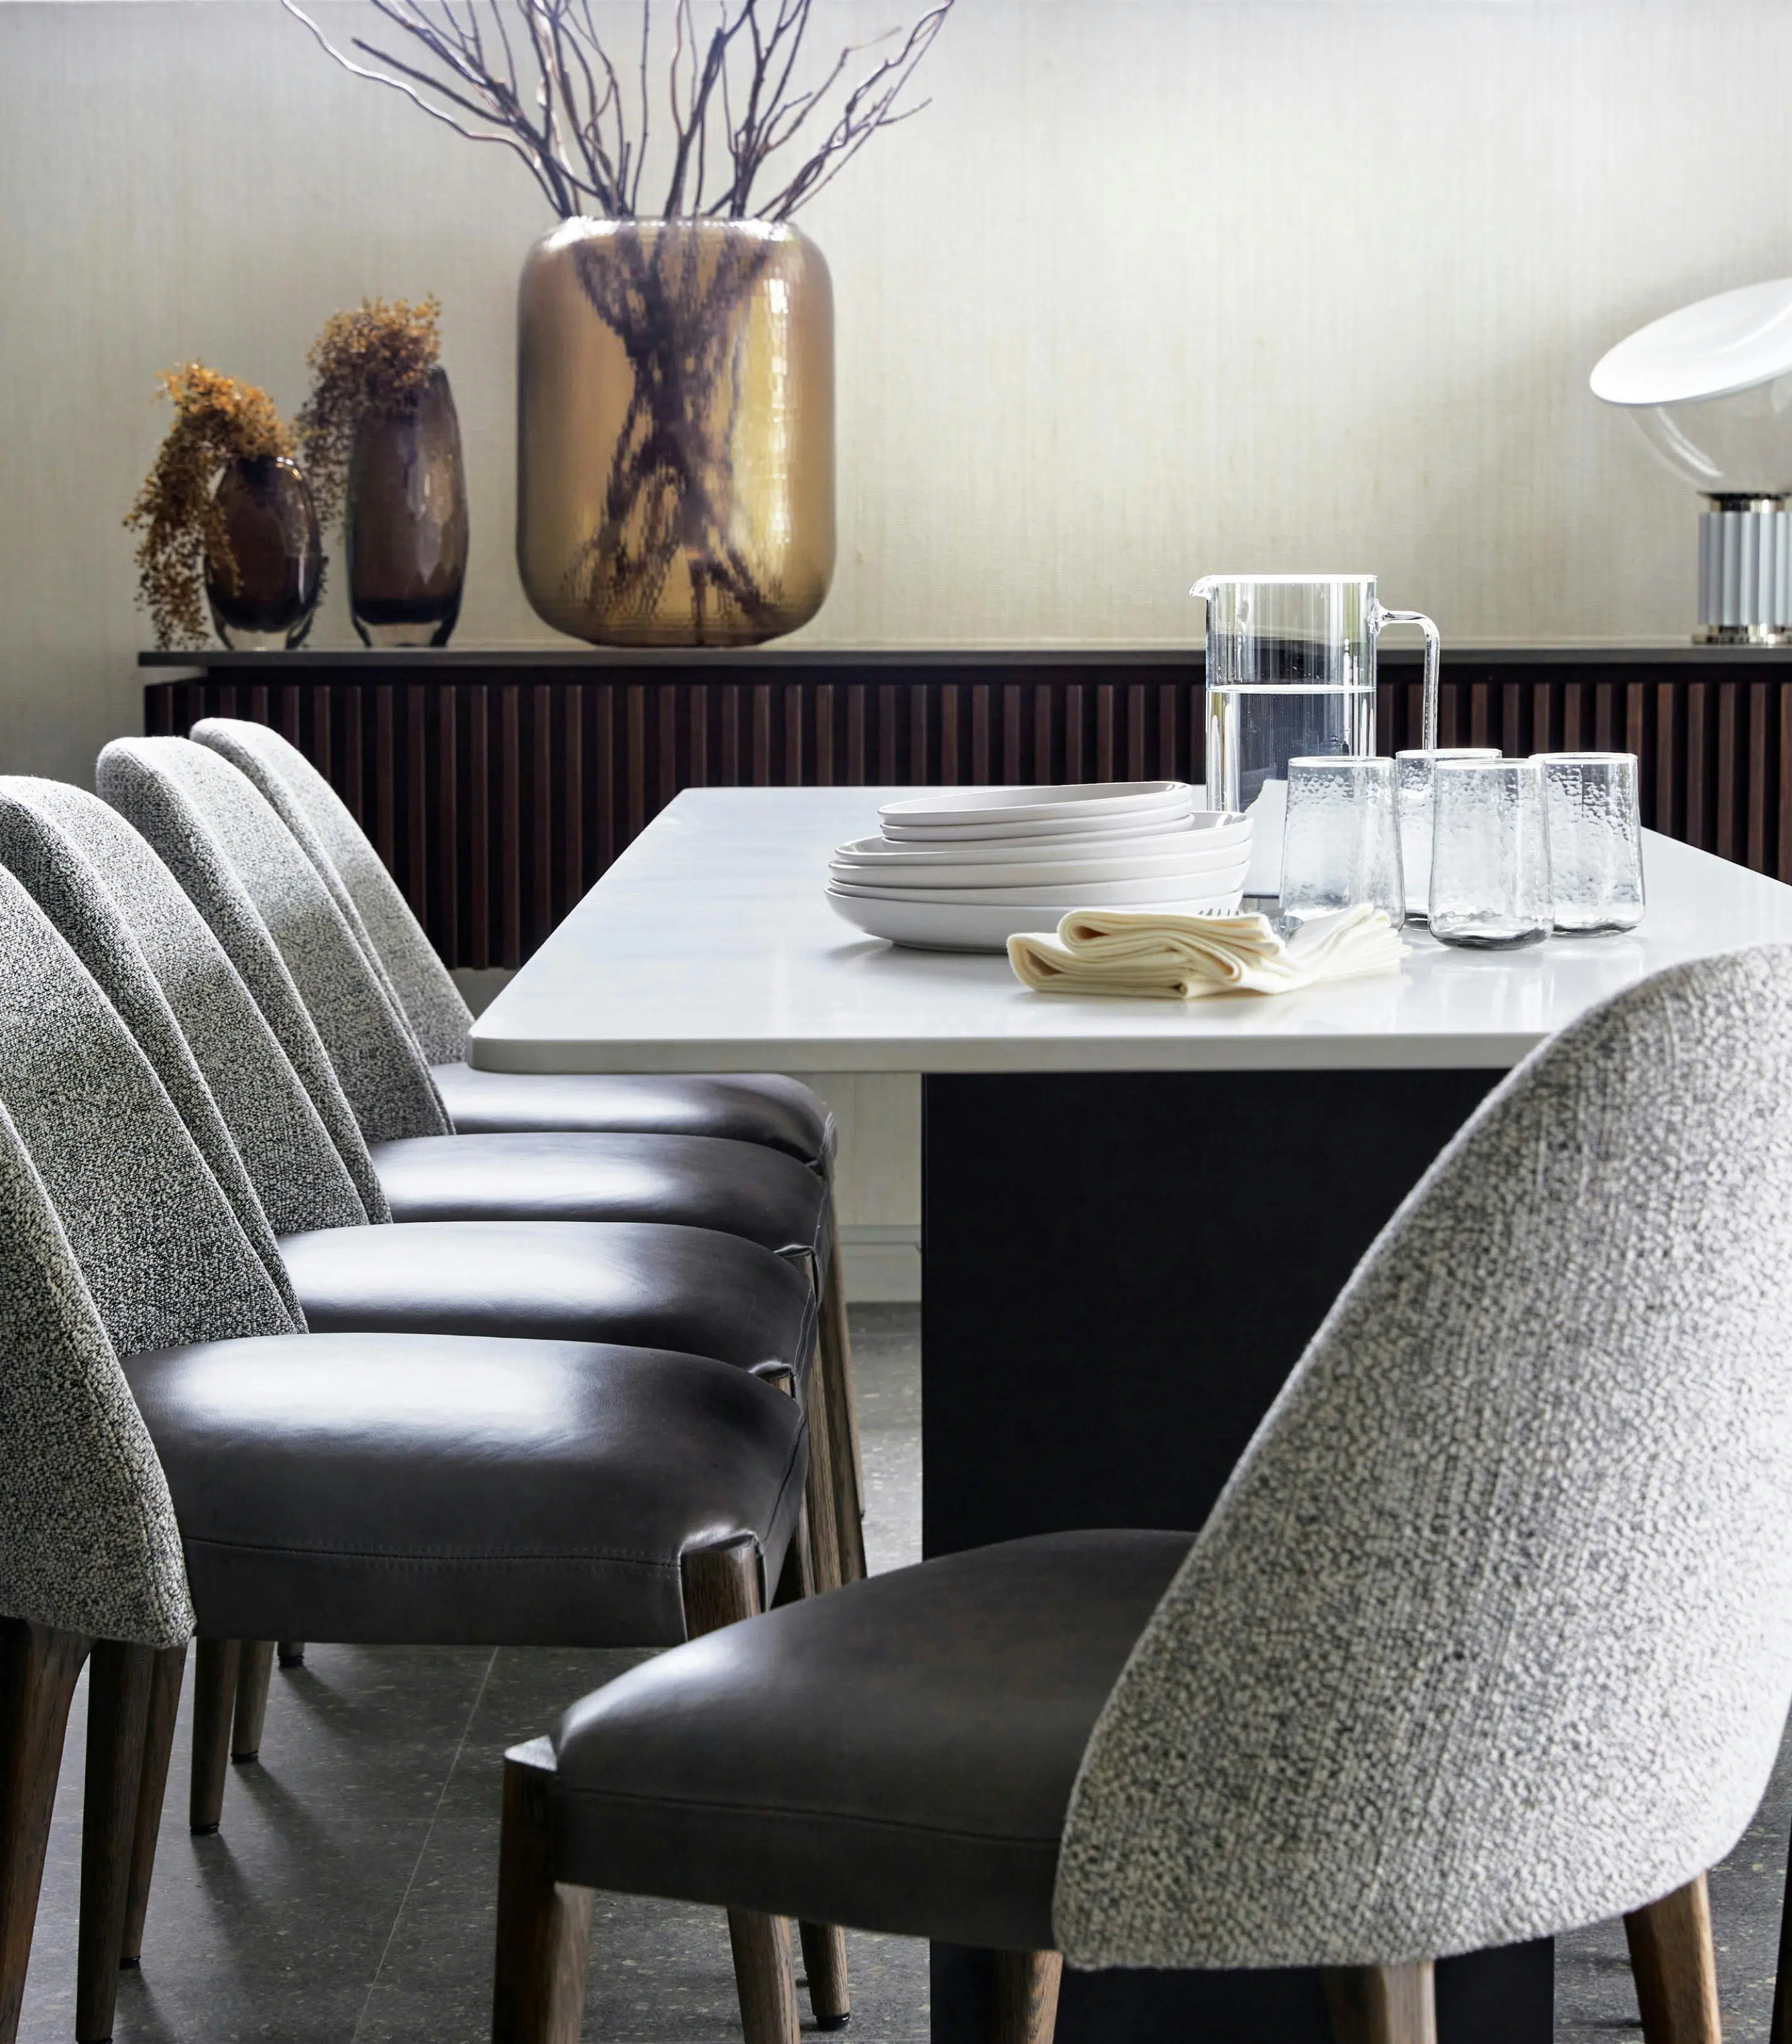 Close-up of modern, grey dining chairs, a dining table and a wooden console table with decorative accents in the background.